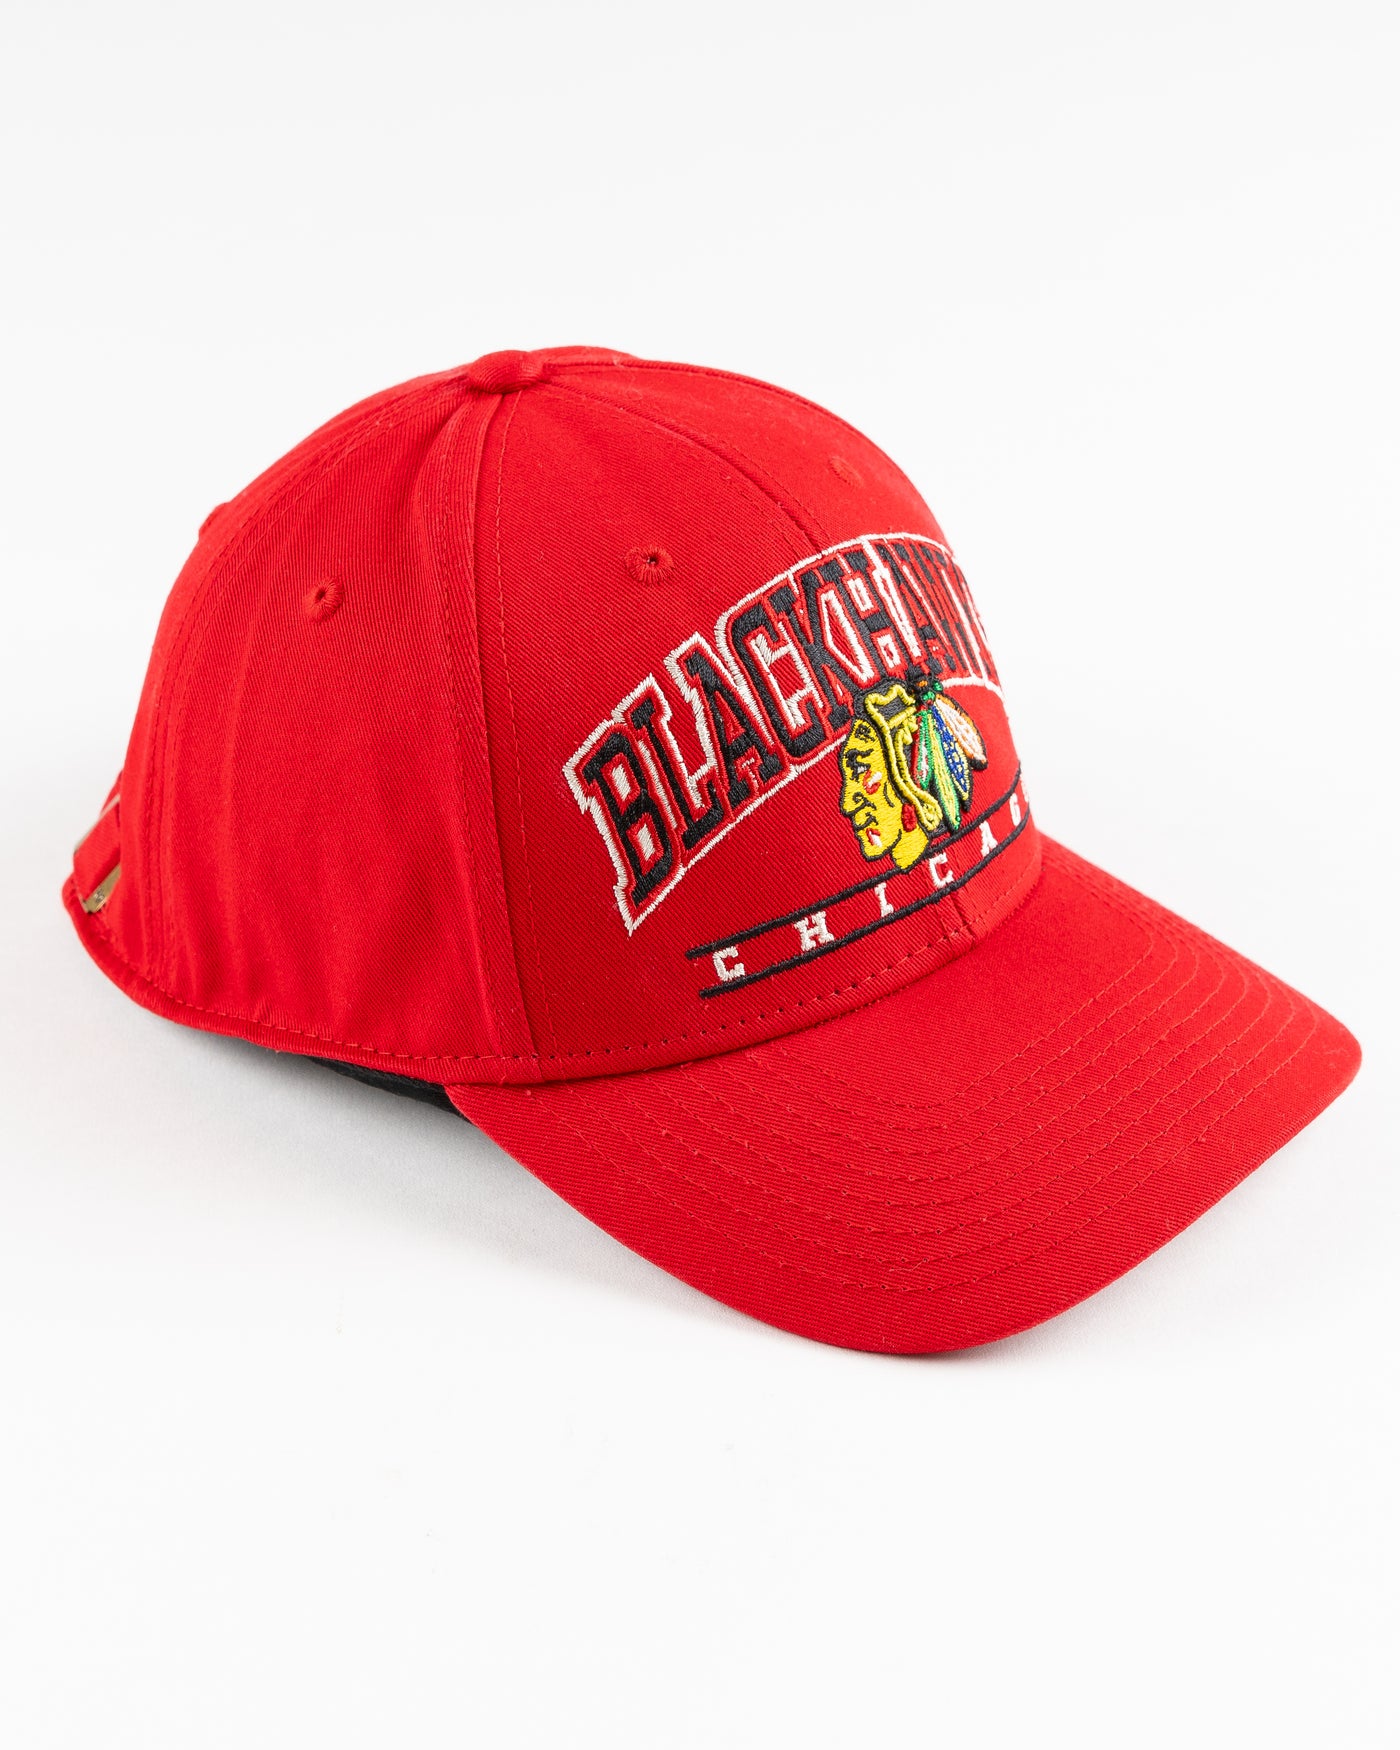 red '47 brand baseball cap with Chicago Blackhawks graphic embroidered on front - right angle lay flat